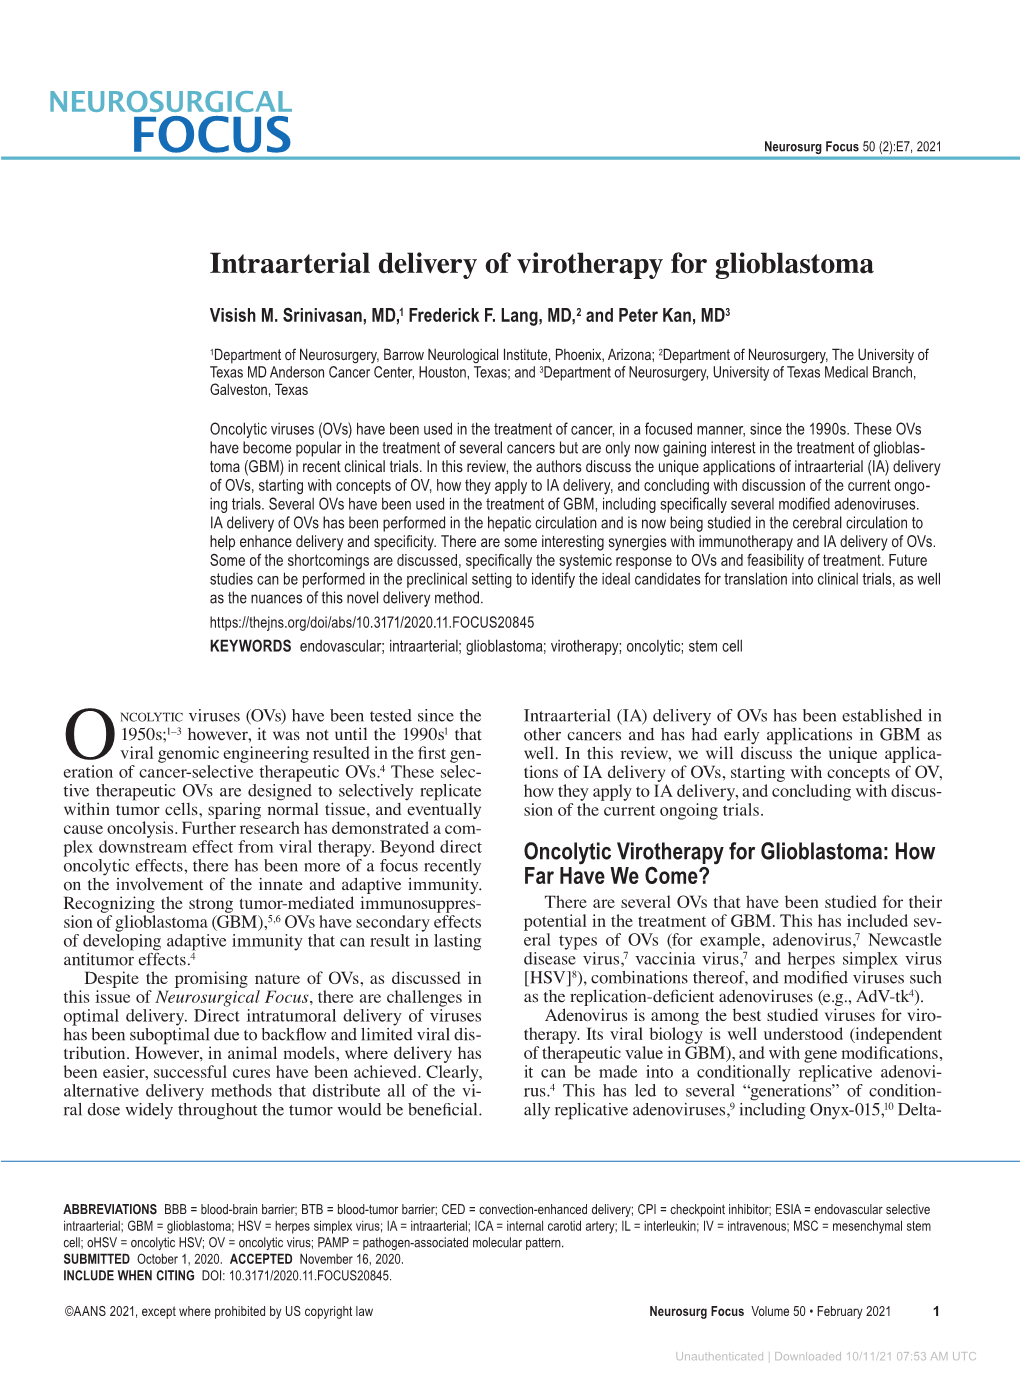 Intraarterial Delivery of Virotherapy for Glioblastoma